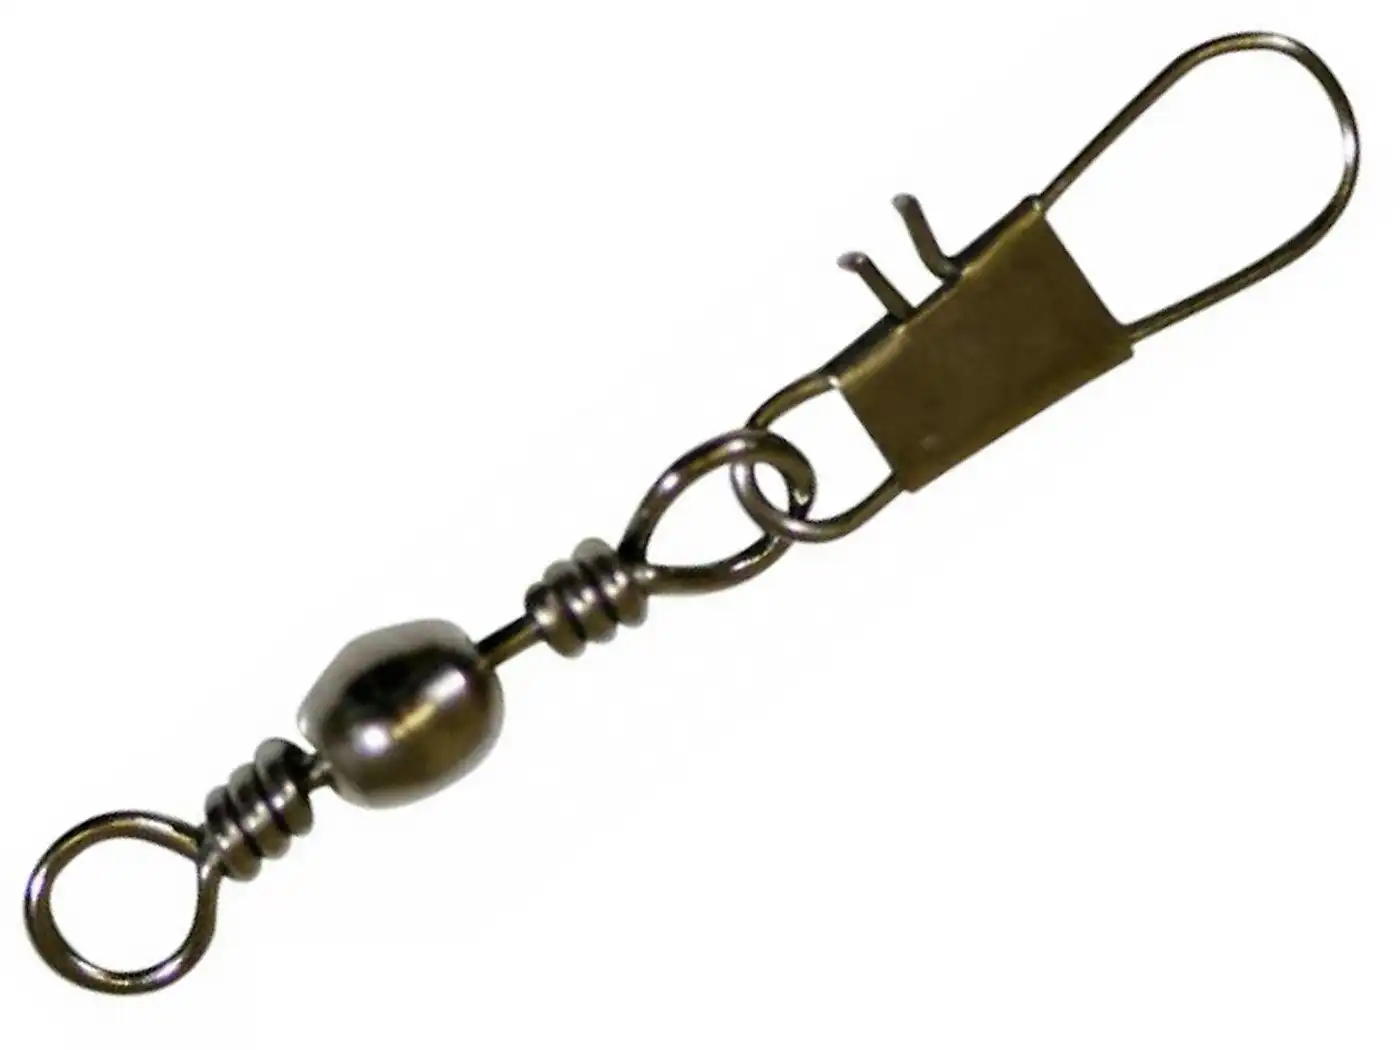 1 x Packet of Mustad Black Ball Bearing Swivels with Cross-Lock Snap, Hooked Online